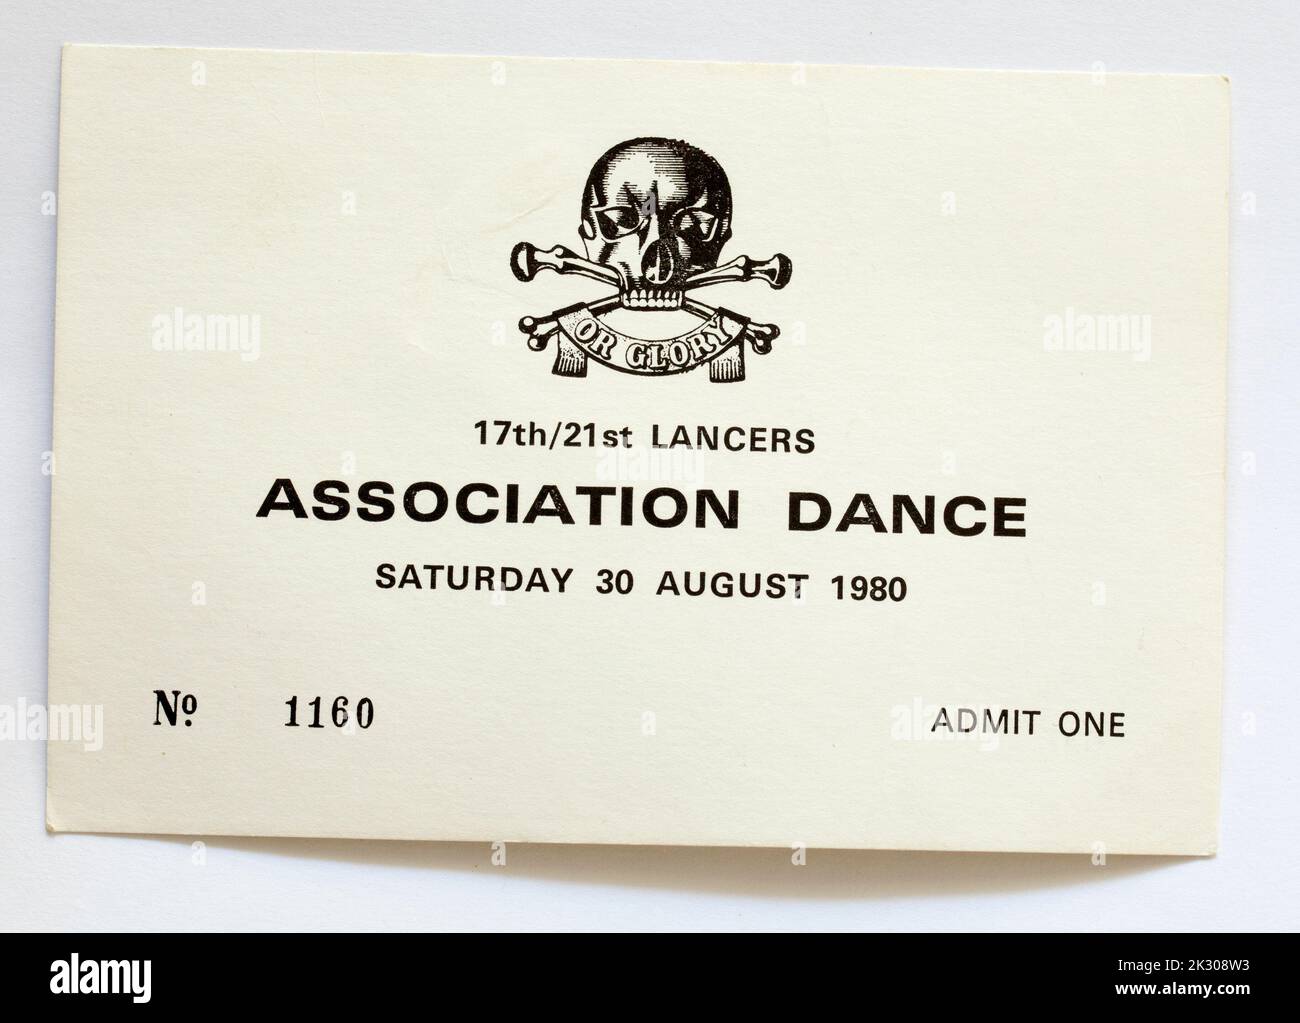 Old Vintage 1980s British Army Miiltary Association Dance Invite Ticket Stock Photo